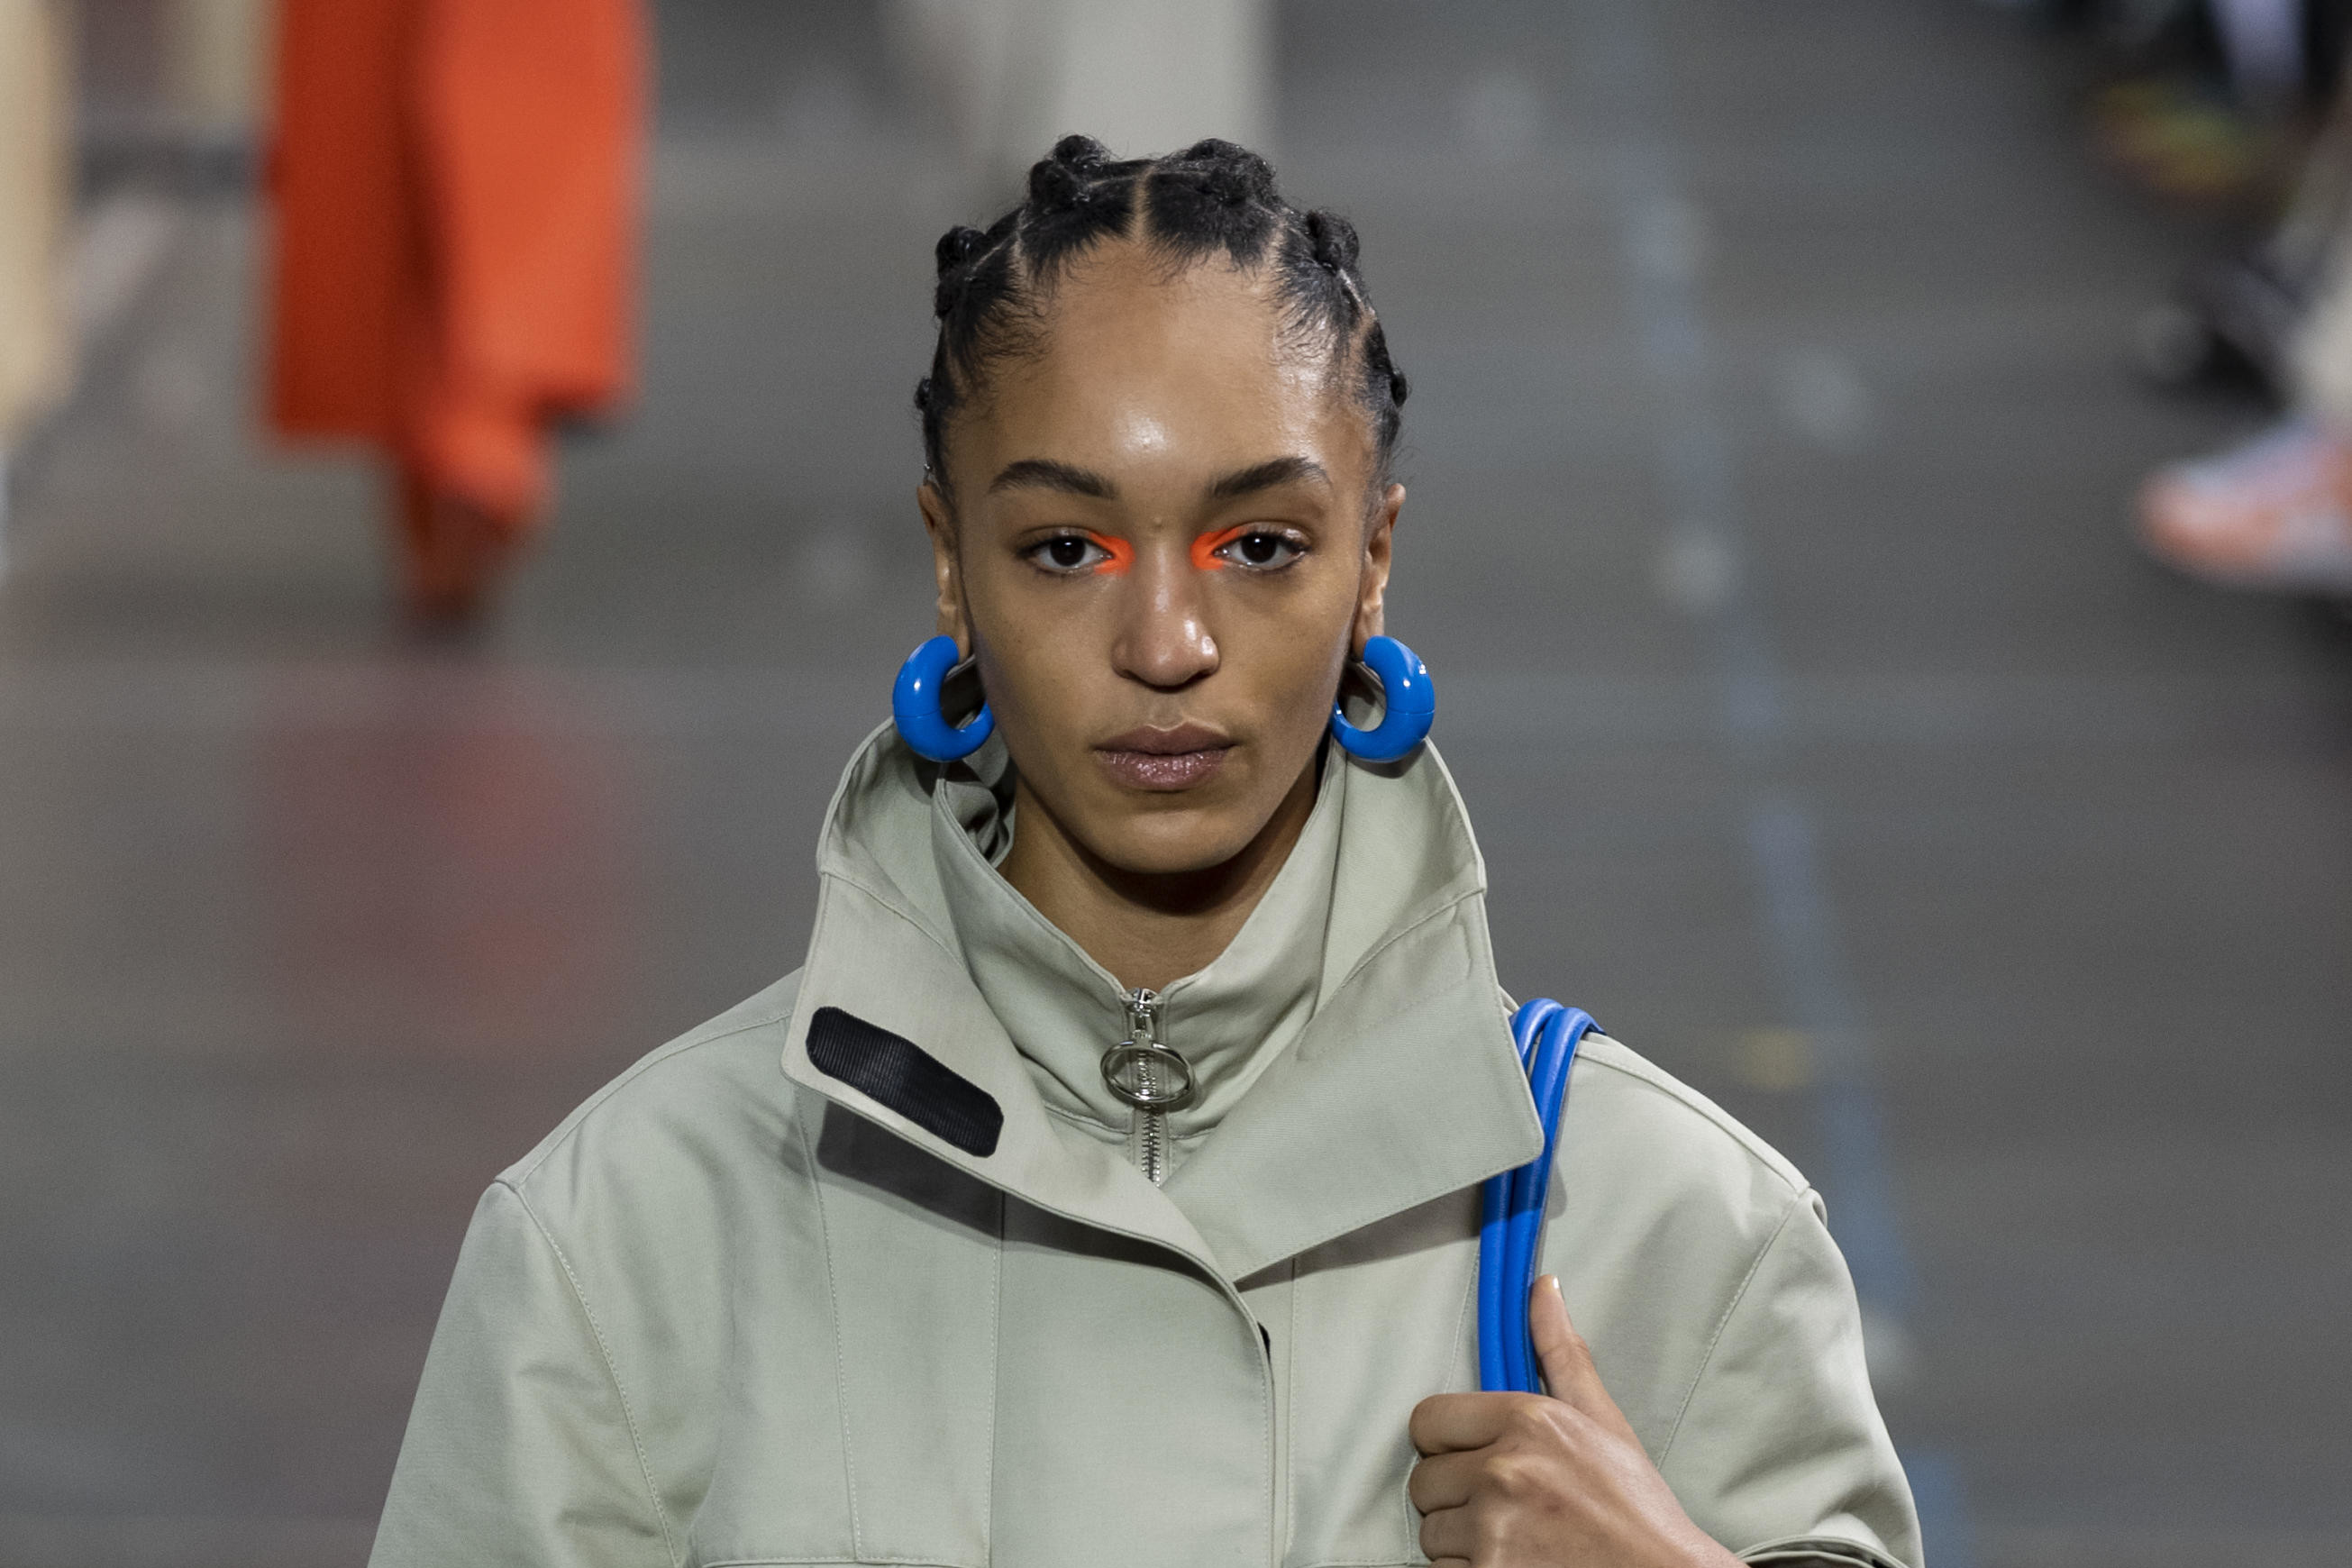 OFF-WHITE Fall Winter 2021 collection runway on July 2021 - Paris, France. 04/07/2021